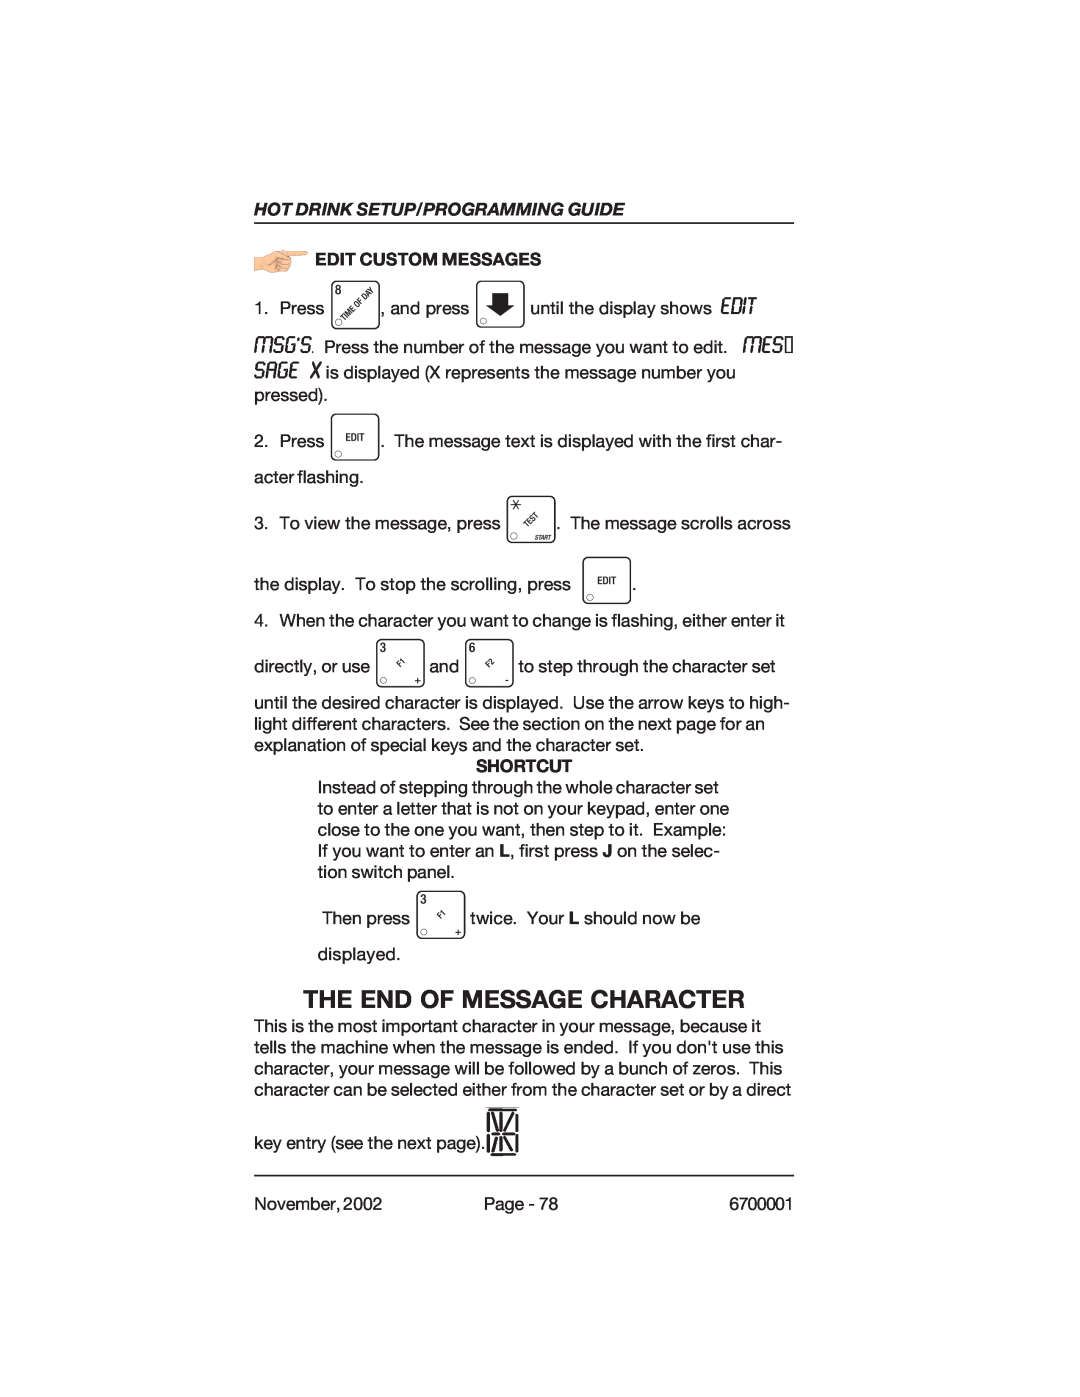 Crane Merchandising Systems 670, 678 manual The End Of Message Character, Edit Custom Messages, Shortcut 